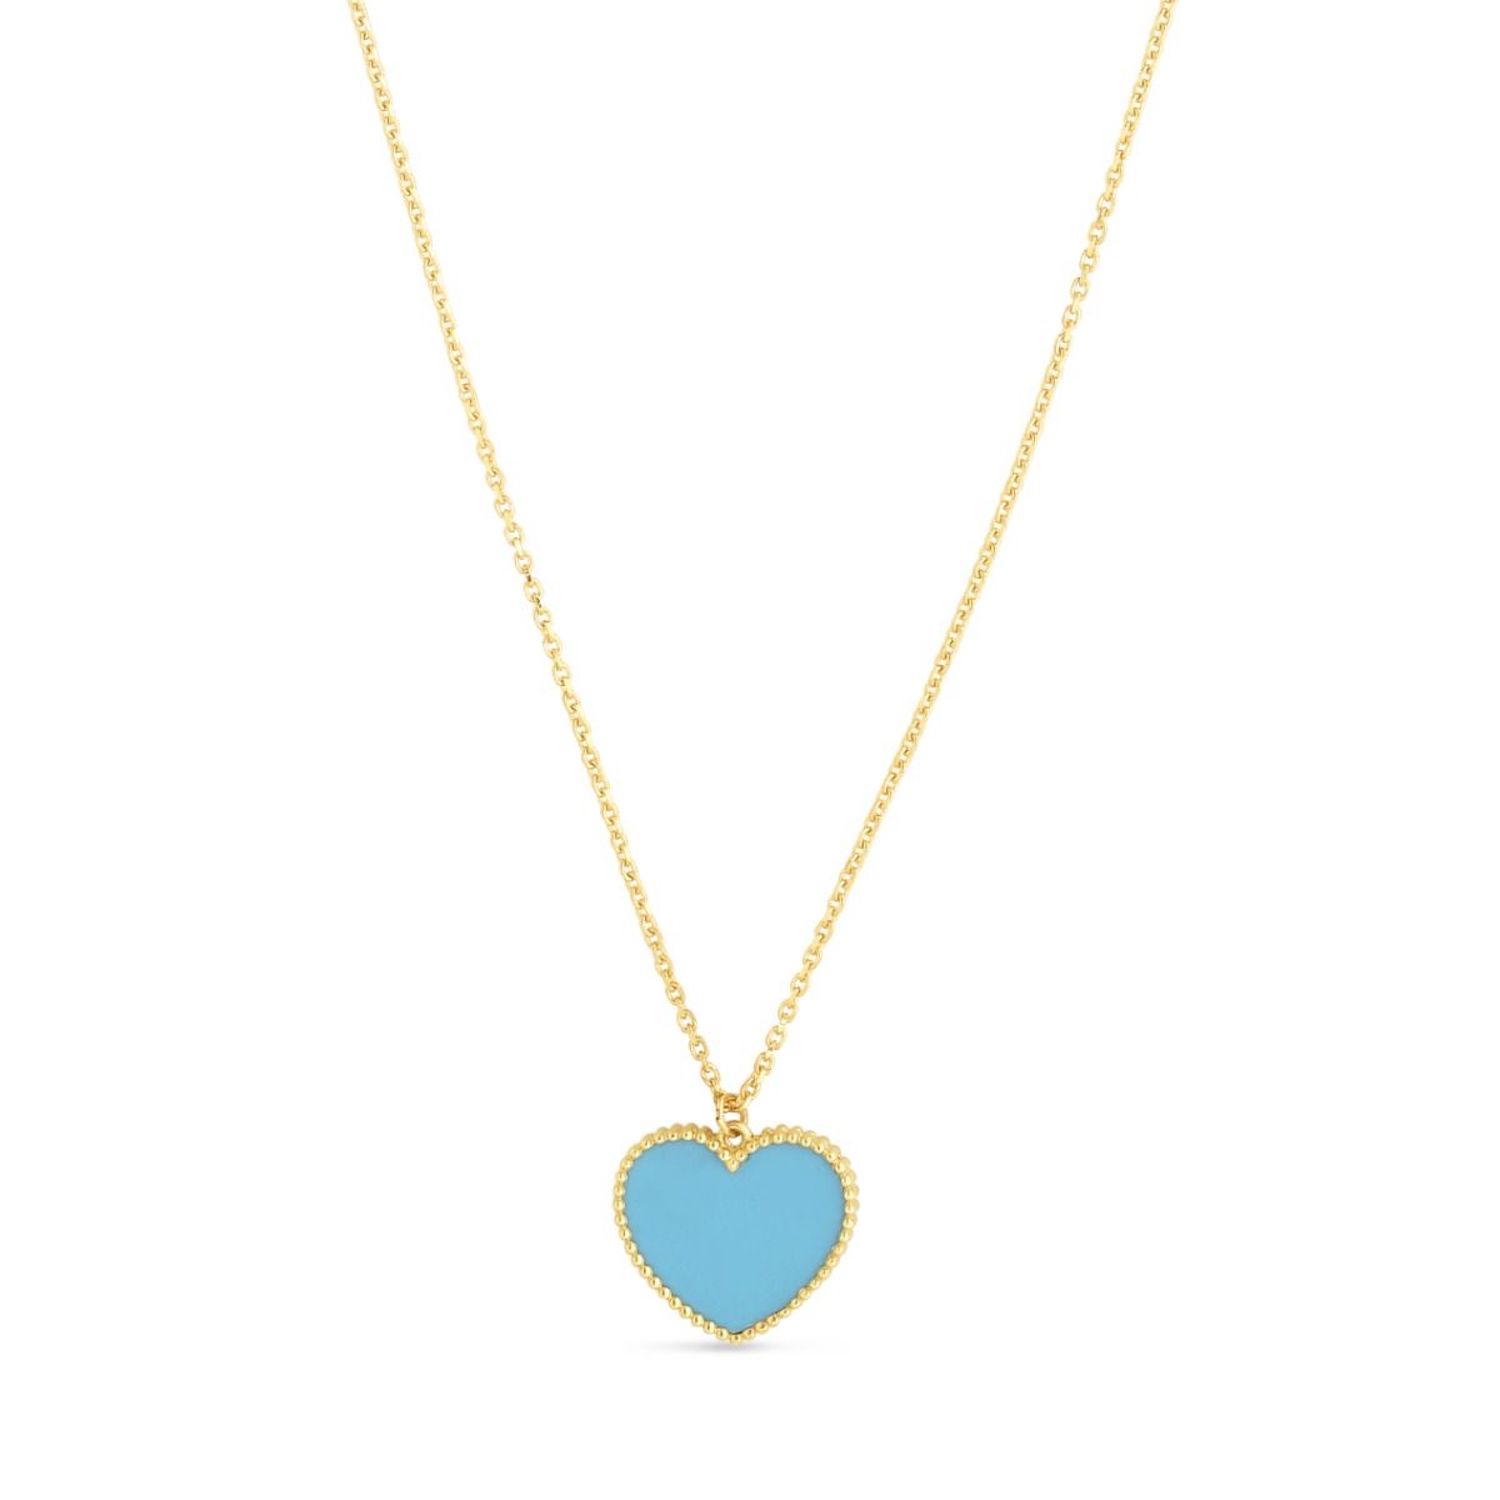 14K Yellow Gold Turquoise Heart Pendant Necklace 17"-18" Adjustable